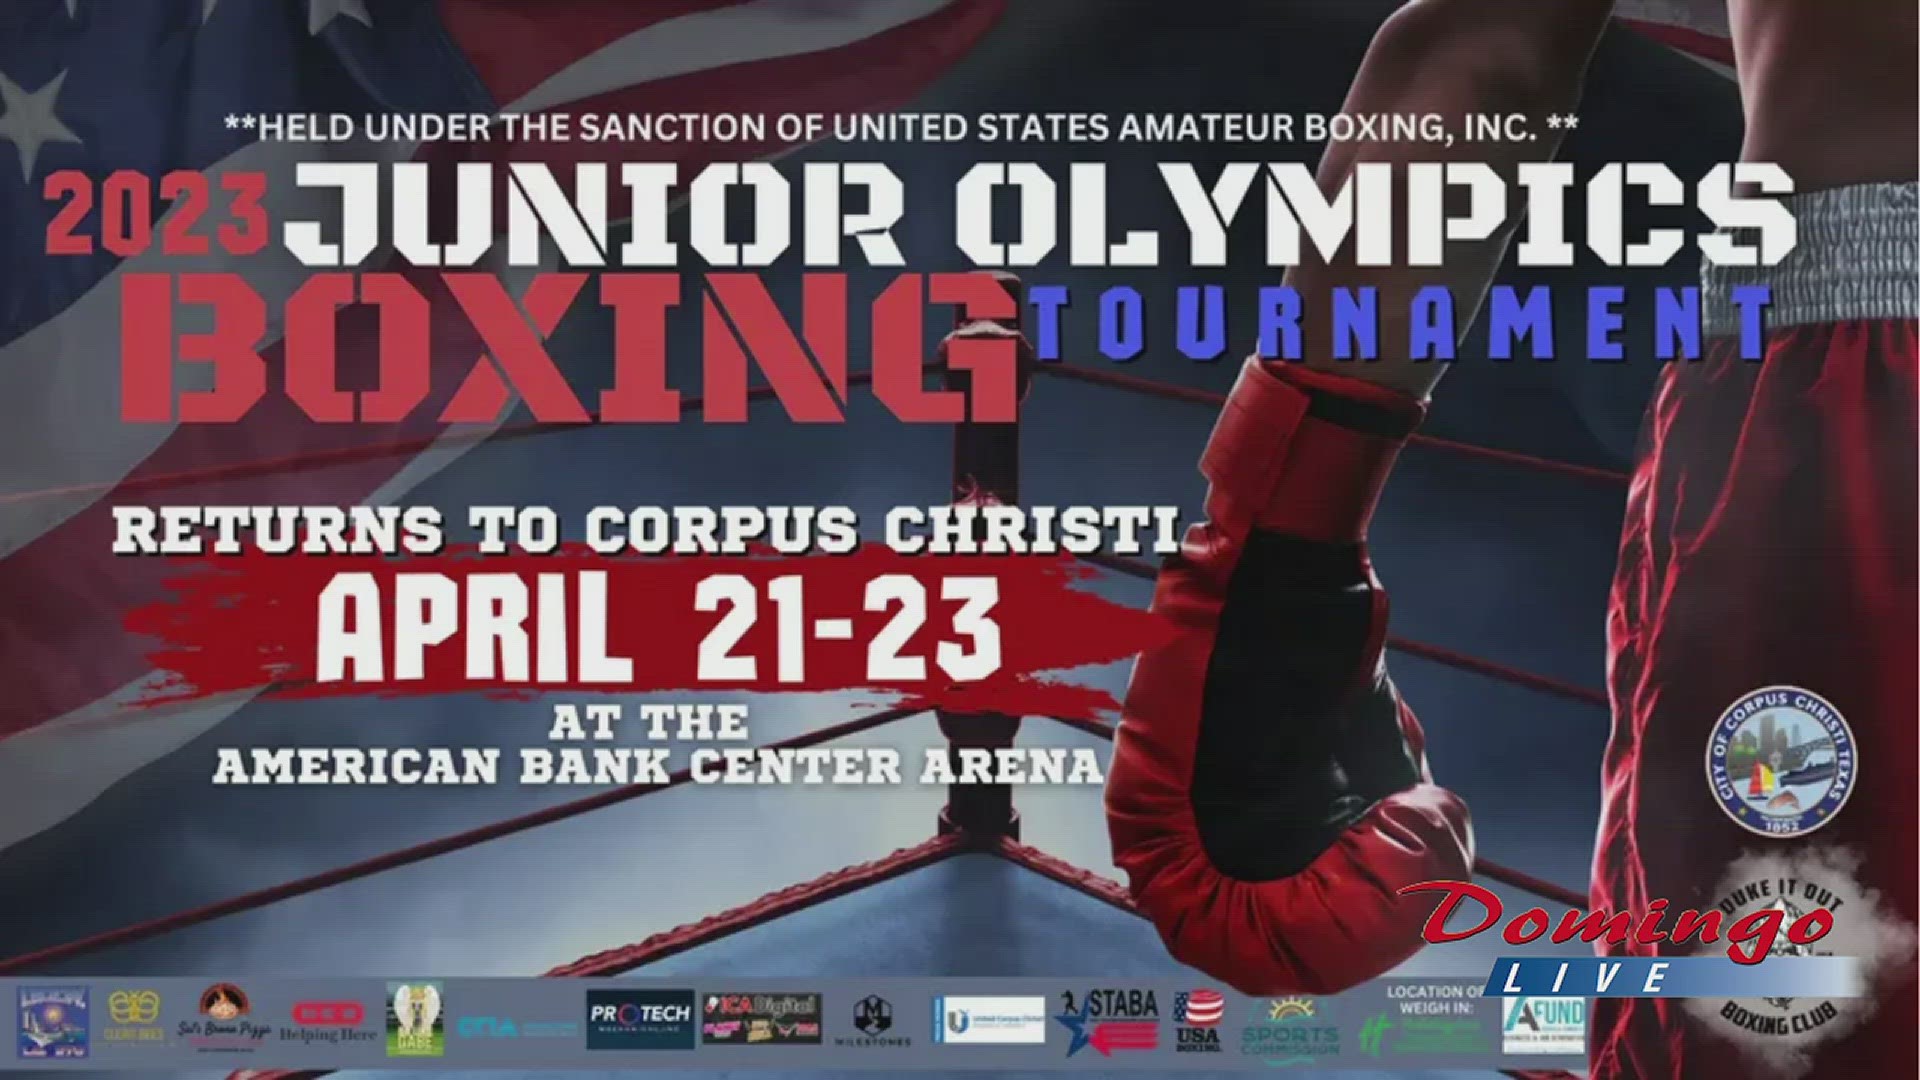 Duke It Out Boxing Club joined us live to show us how they're preparing for the 2023 Junior Olympics Boxing Tournament at the American Bank Center on Apr. 21-23.